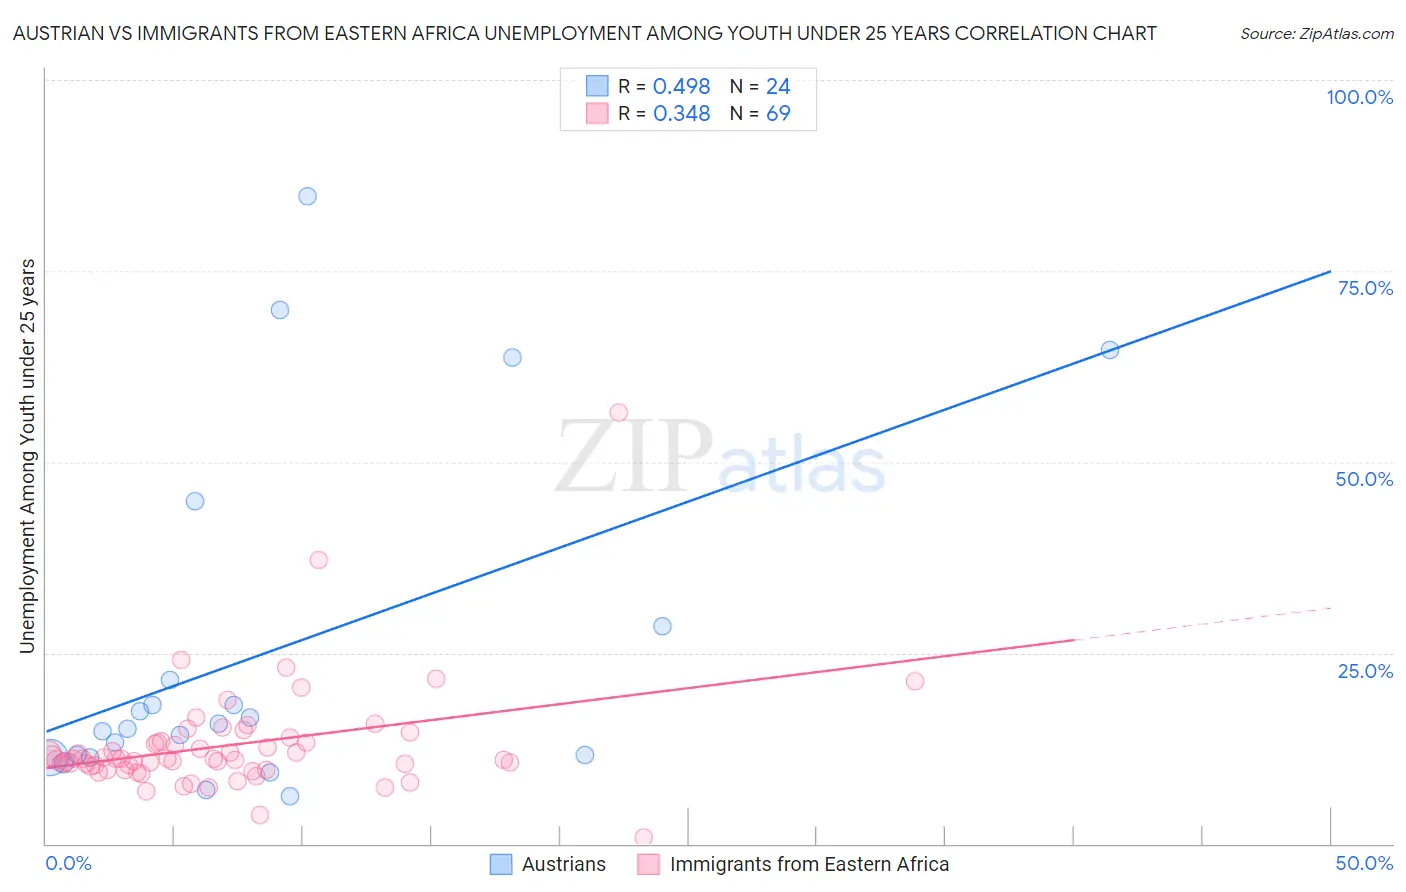 Austrian vs Immigrants from Eastern Africa Unemployment Among Youth under 25 years